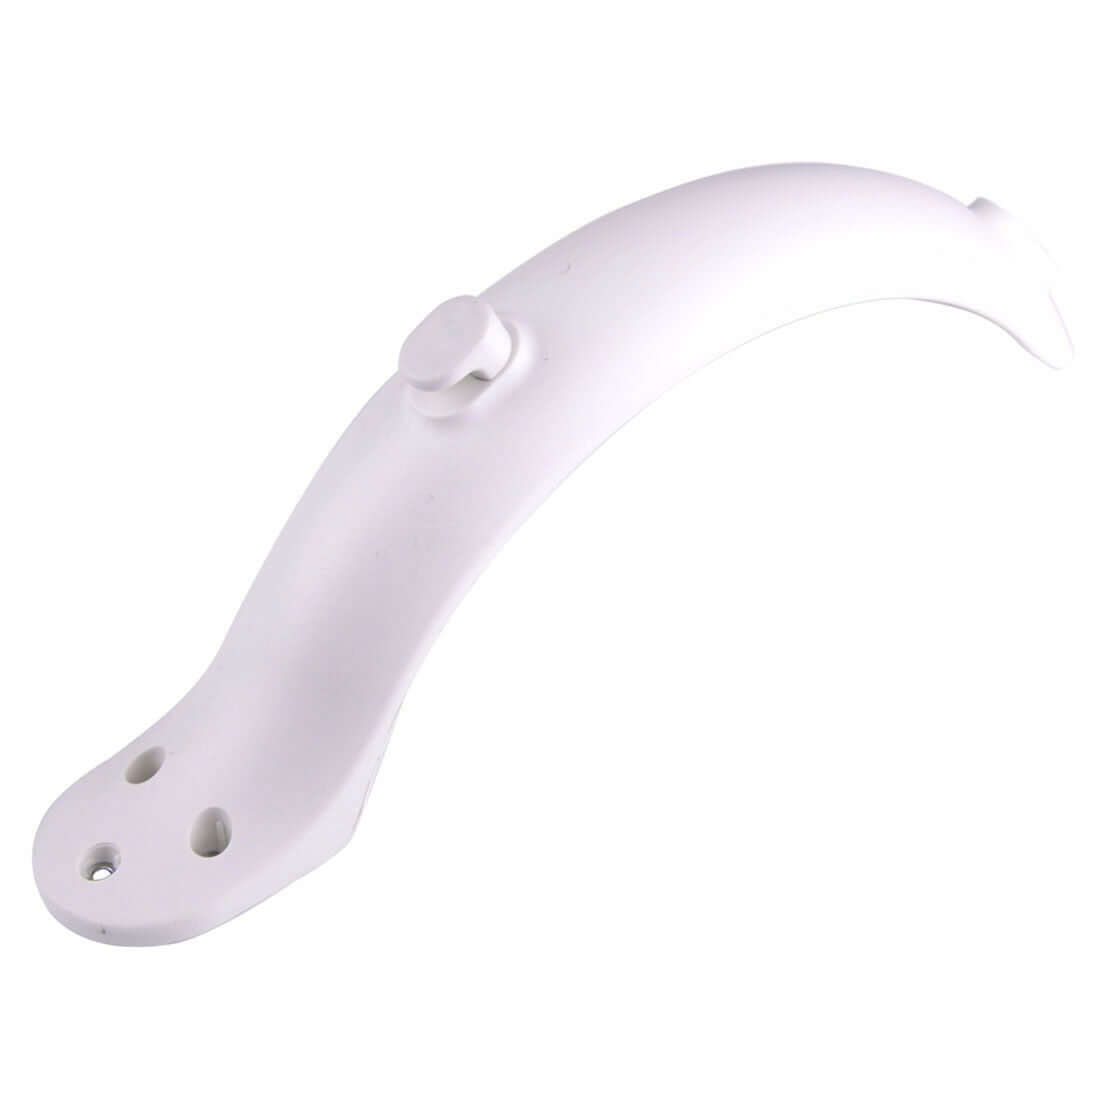 Rear White Fender Mudguard with Hook for Xiaomi M365 / 1s / Essential Electric Scooter